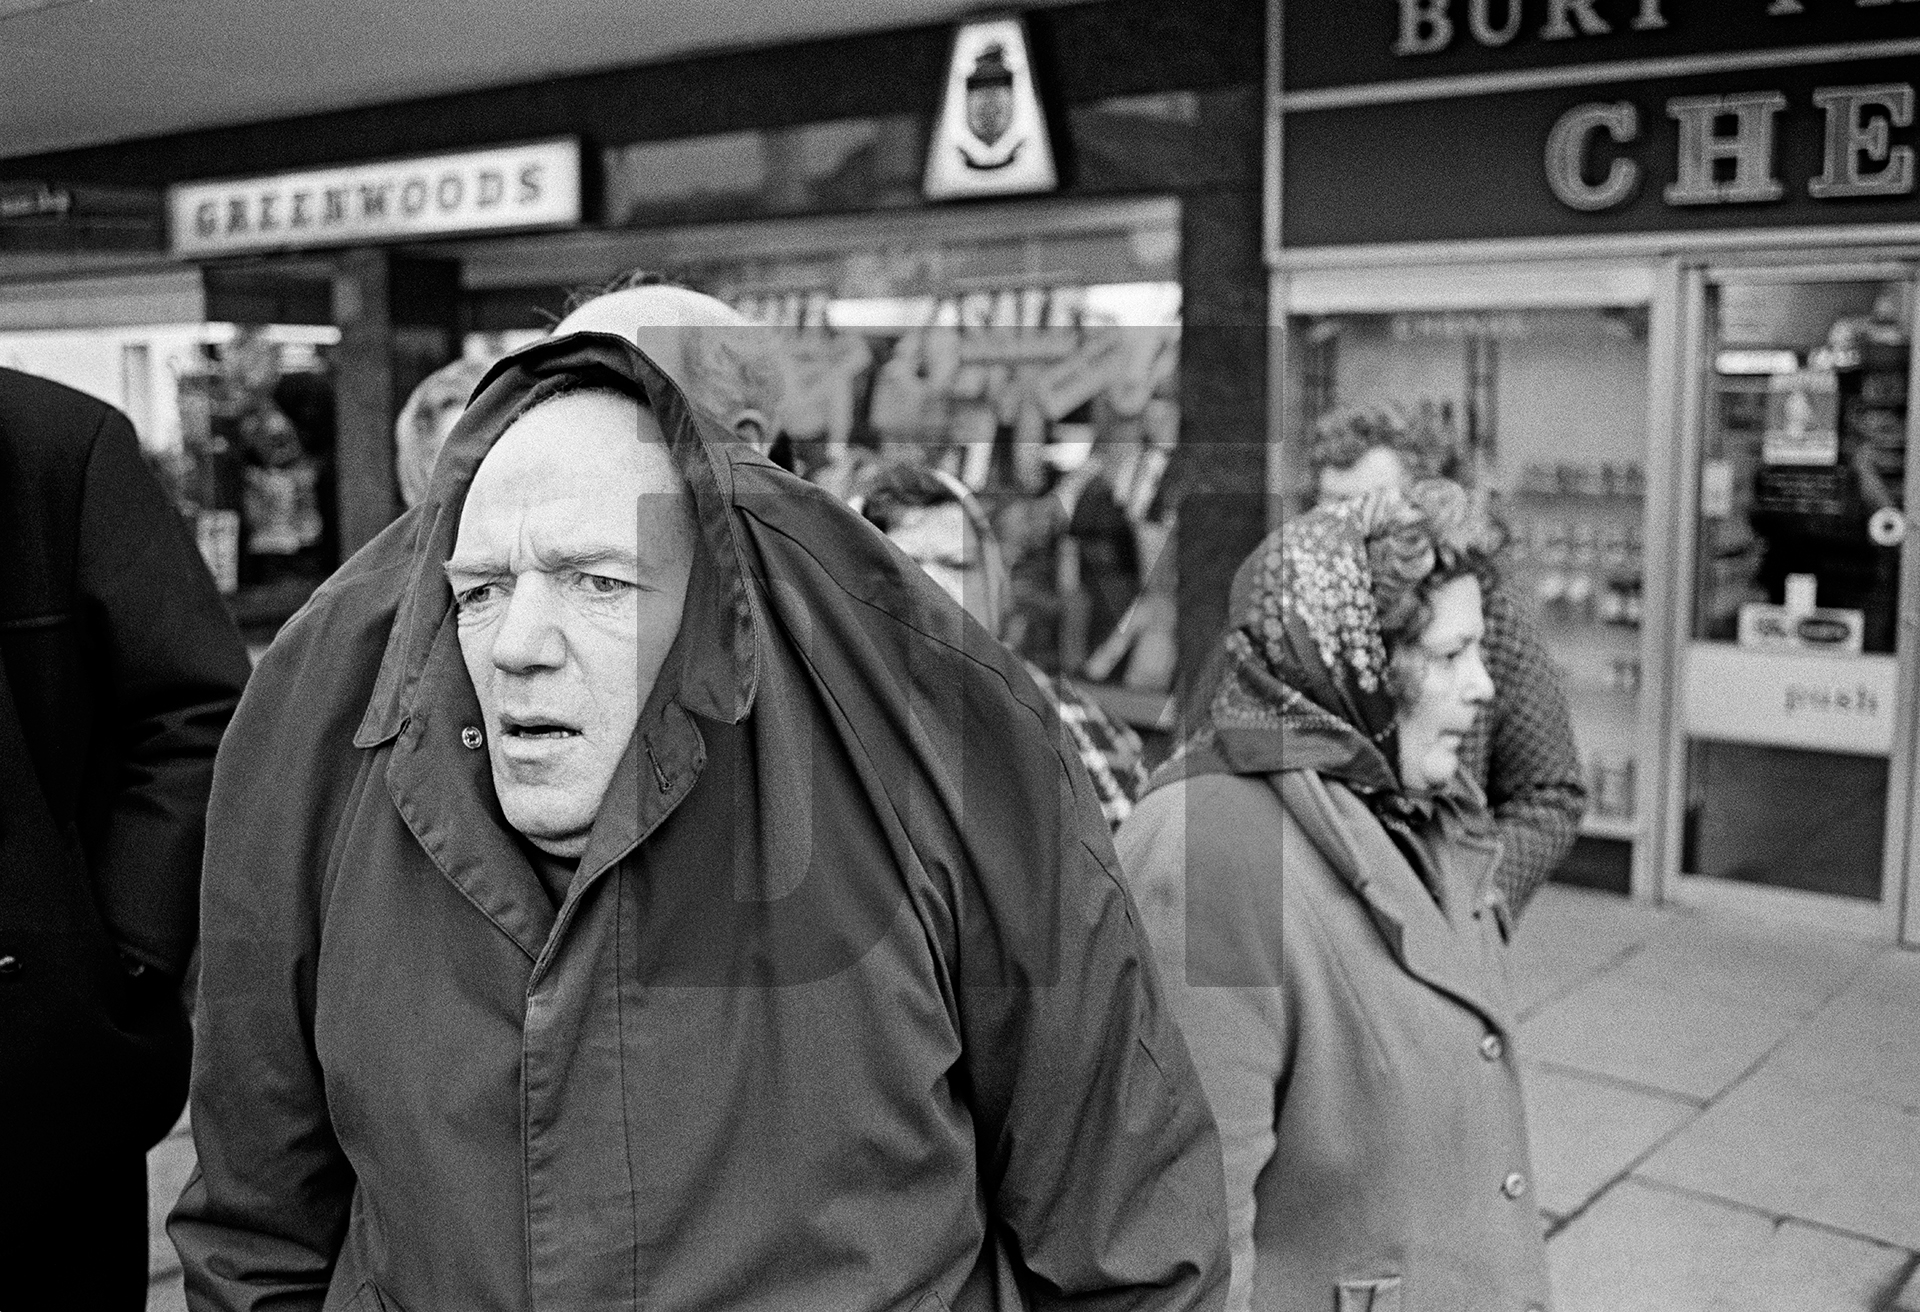 John Joe Canney, aged 54 formerly a bobbin carrier, finds a supervised trip out to Bury market all a bit much. February 1978 by Daniel Meadows